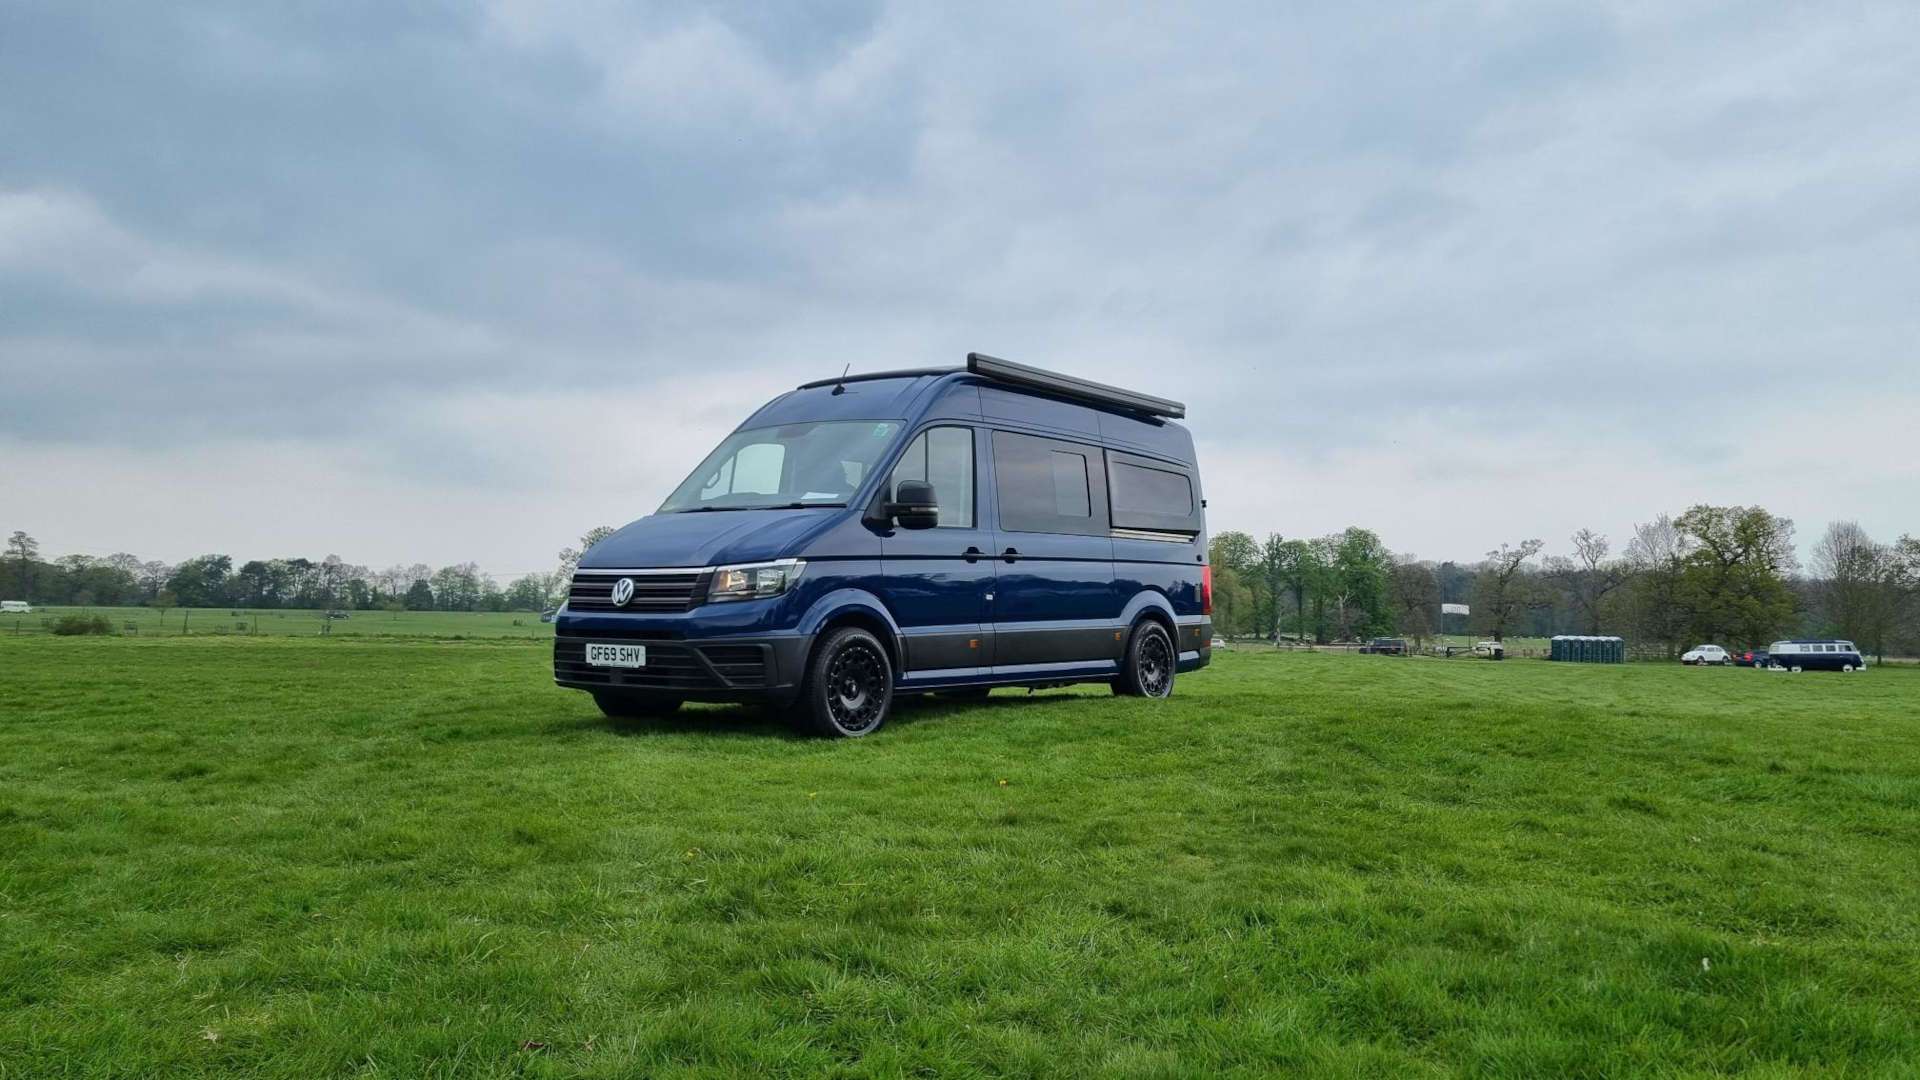 VW Crafter Campervan Leicestershire